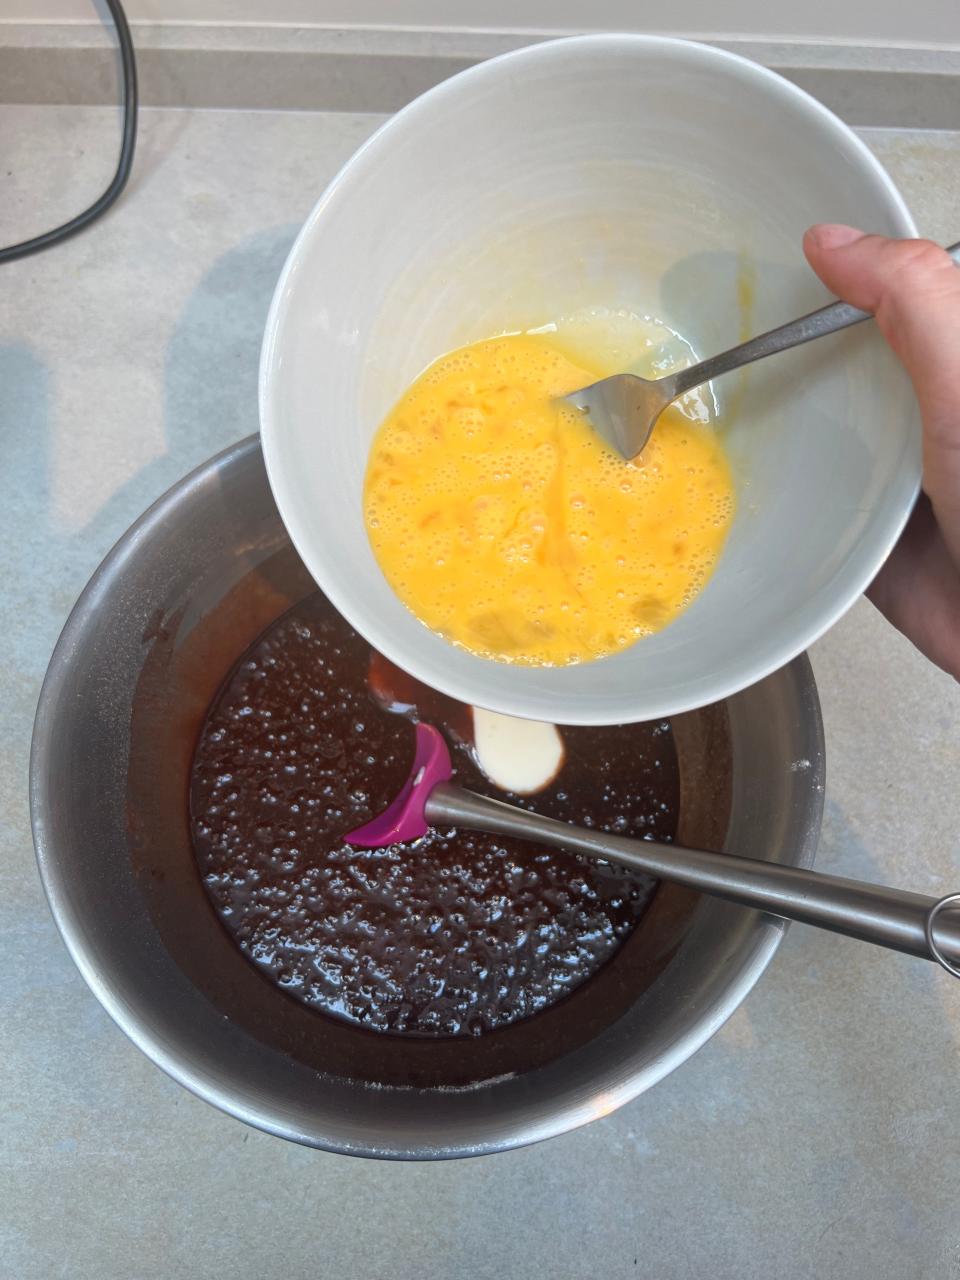 A bowl of whisked eggs being held over the bowl of batter.